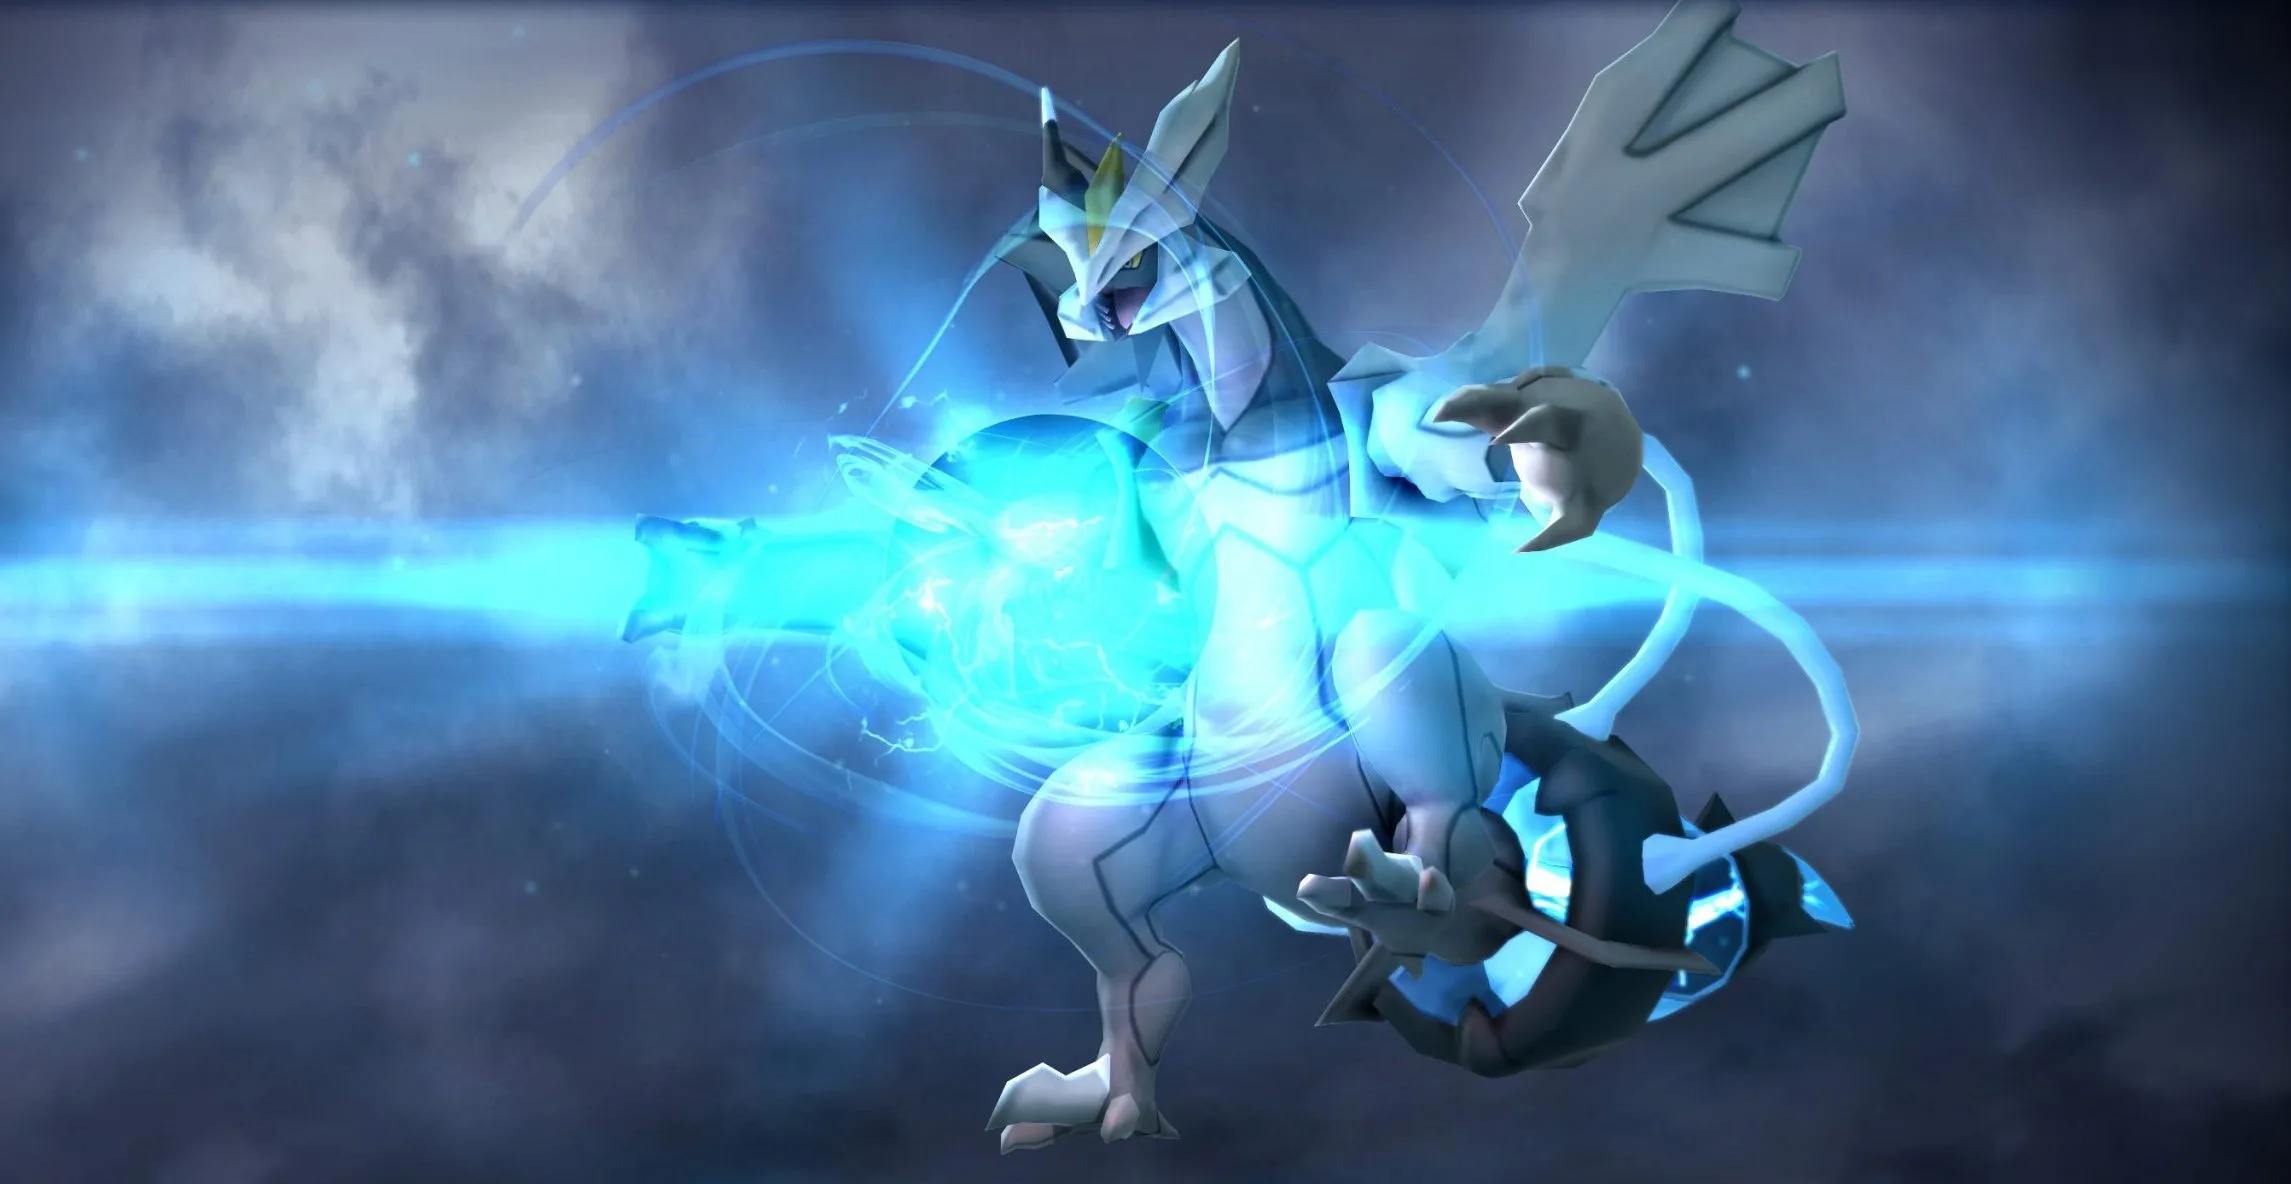 Kyurem is a powerful special attacker in battle thanks to its high base stat in Special Attack, which is one of its strongest attributes. 